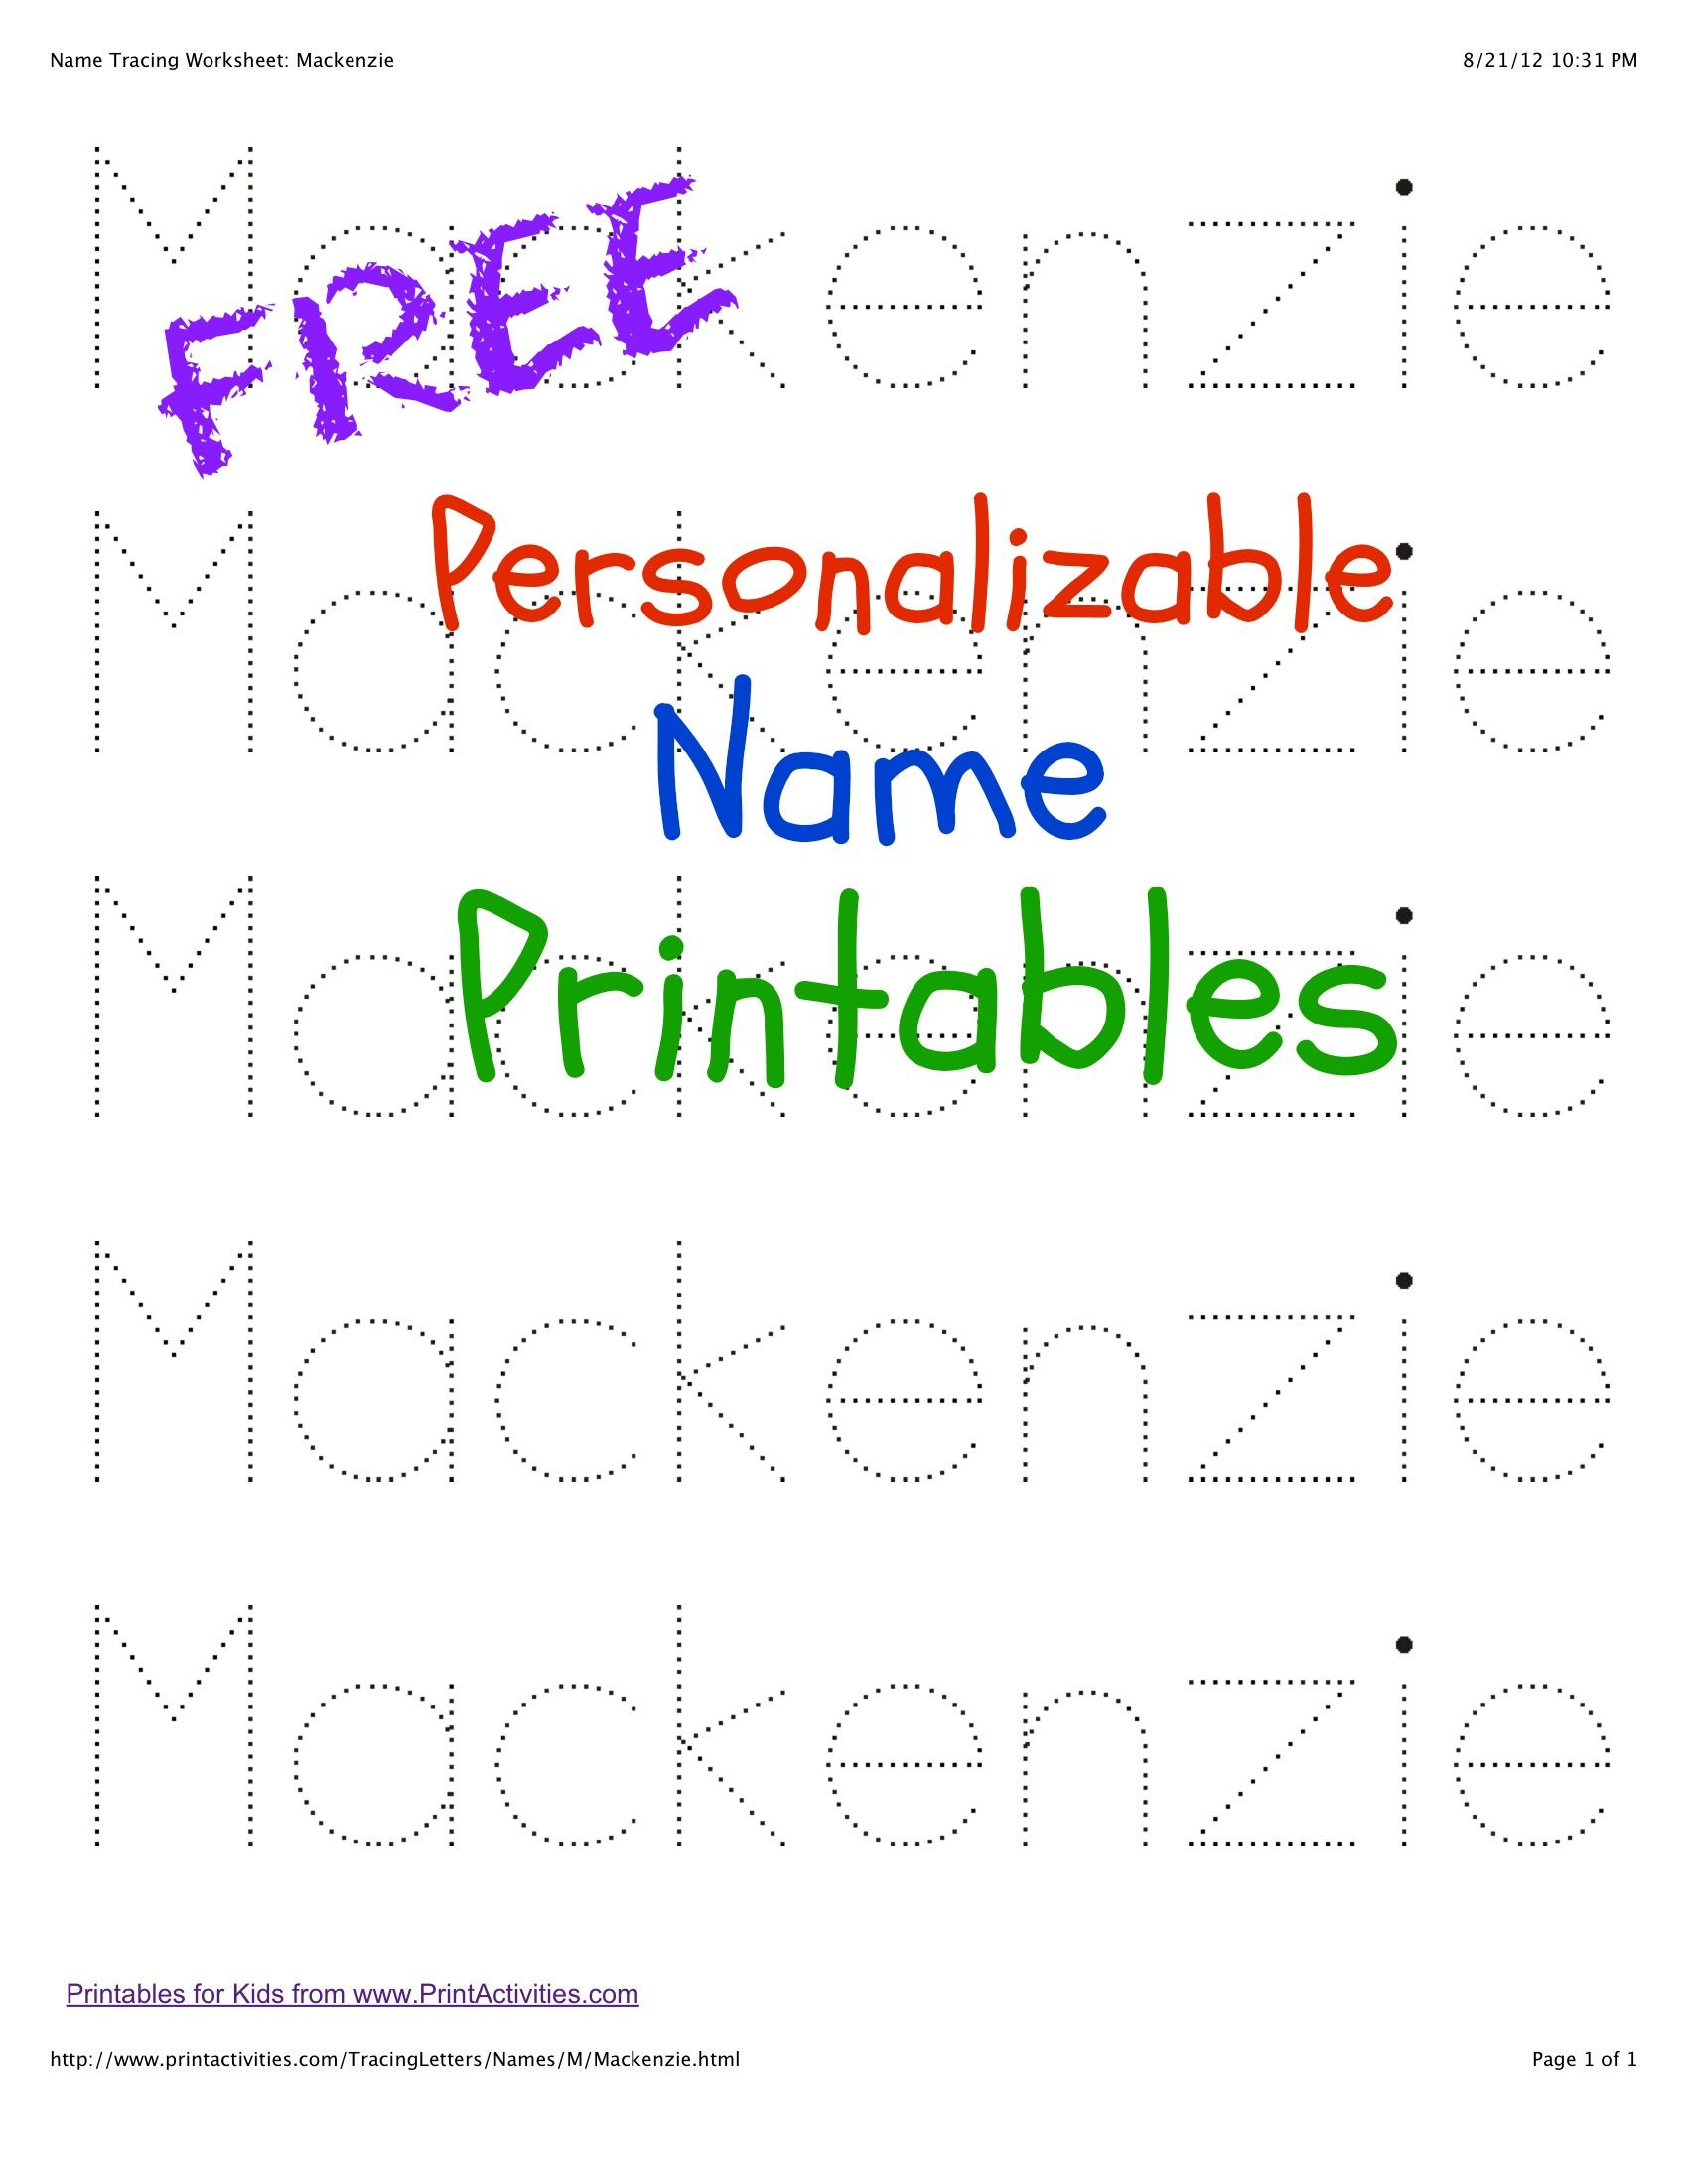 Pintheresa Mcduffie On Educational For Kids | Pinterest - Free Printable Name Tracing